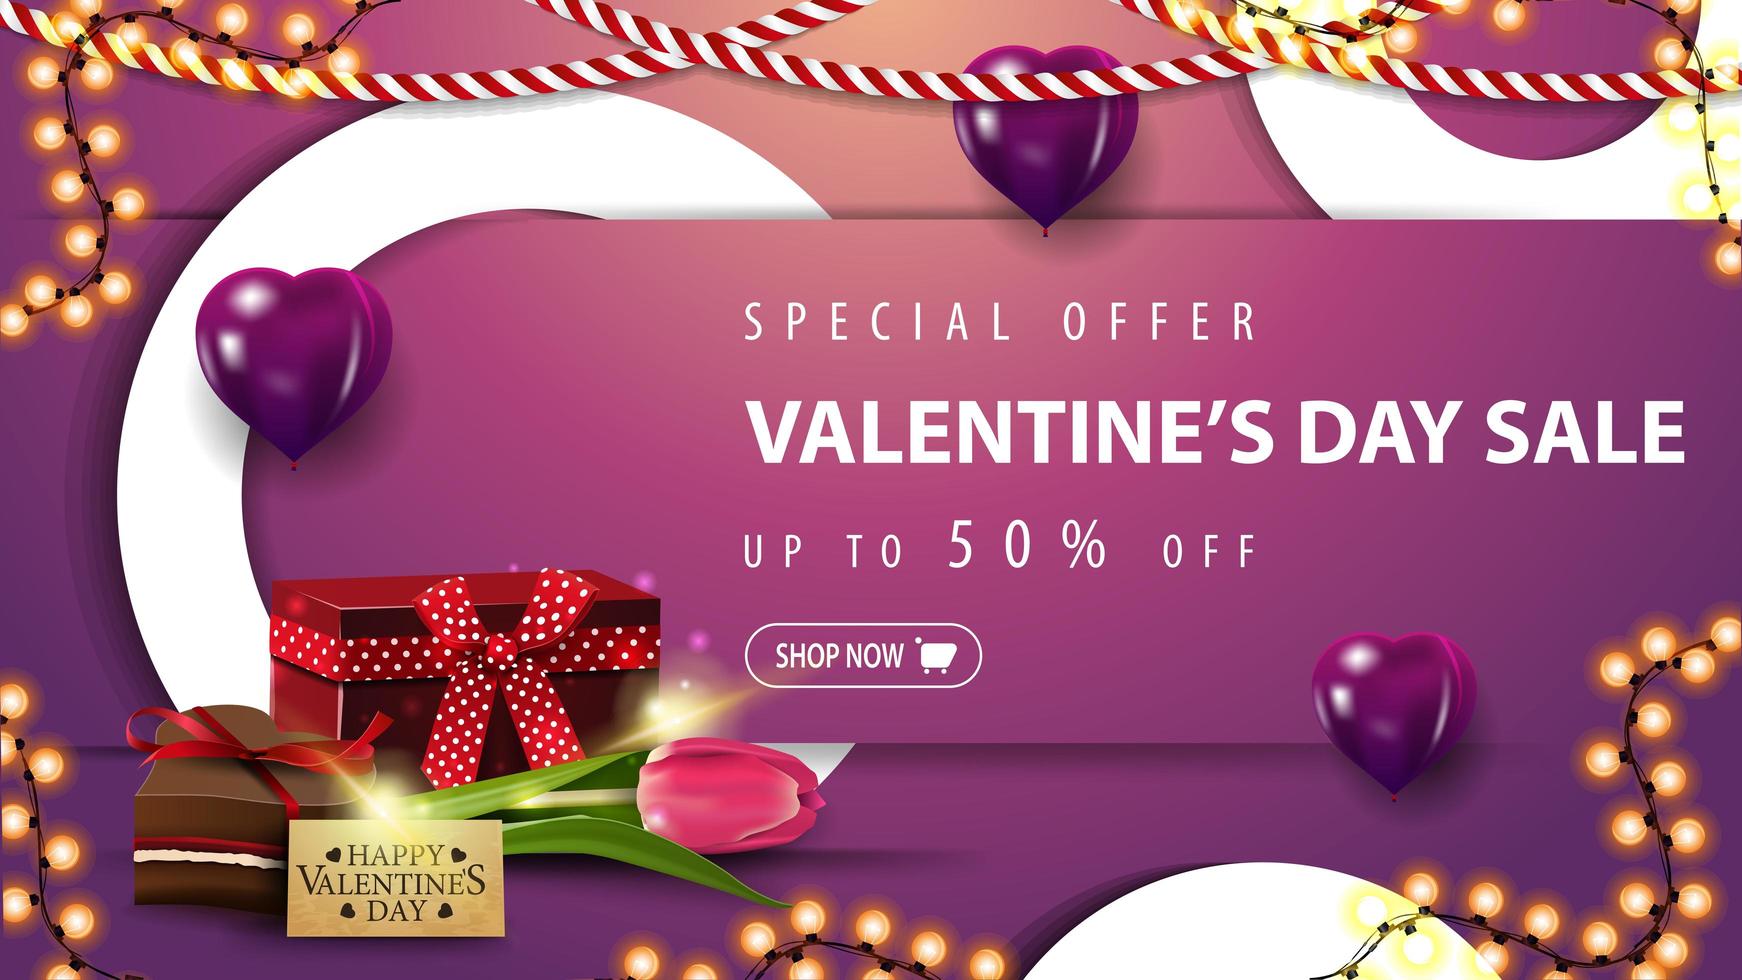 Valentine's sale, up to 50 off banner vector